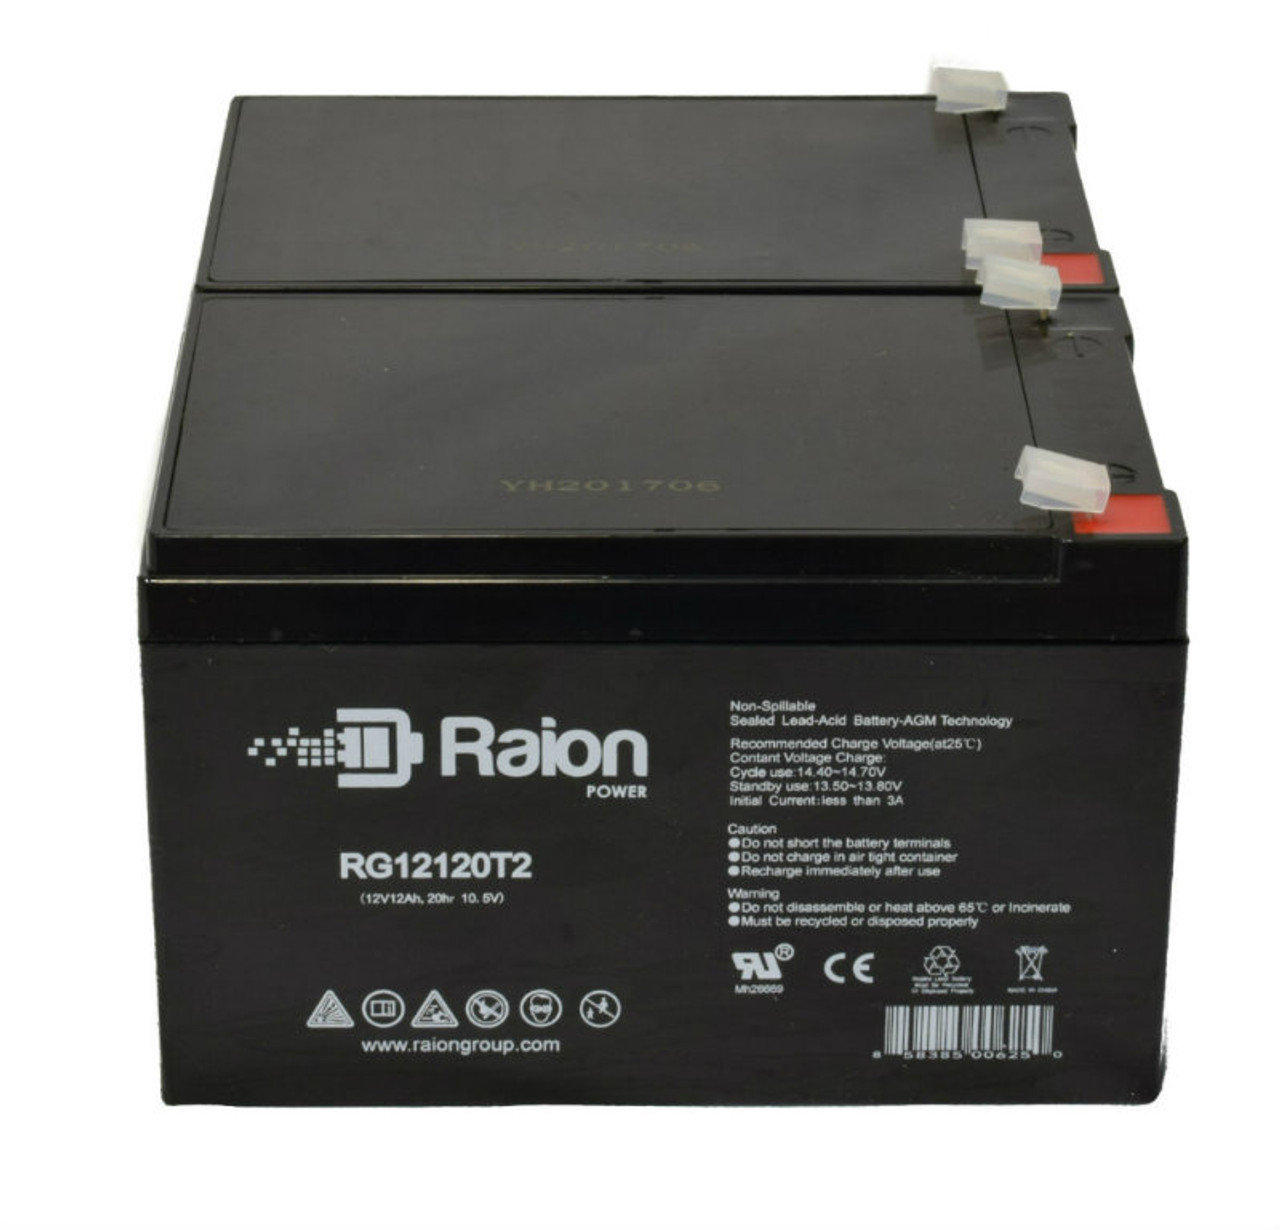 Raion Power 12V 12Ah Non-Spillable Compatible Replacement Battery for Union Battery MX-12120 - (2 Pack)